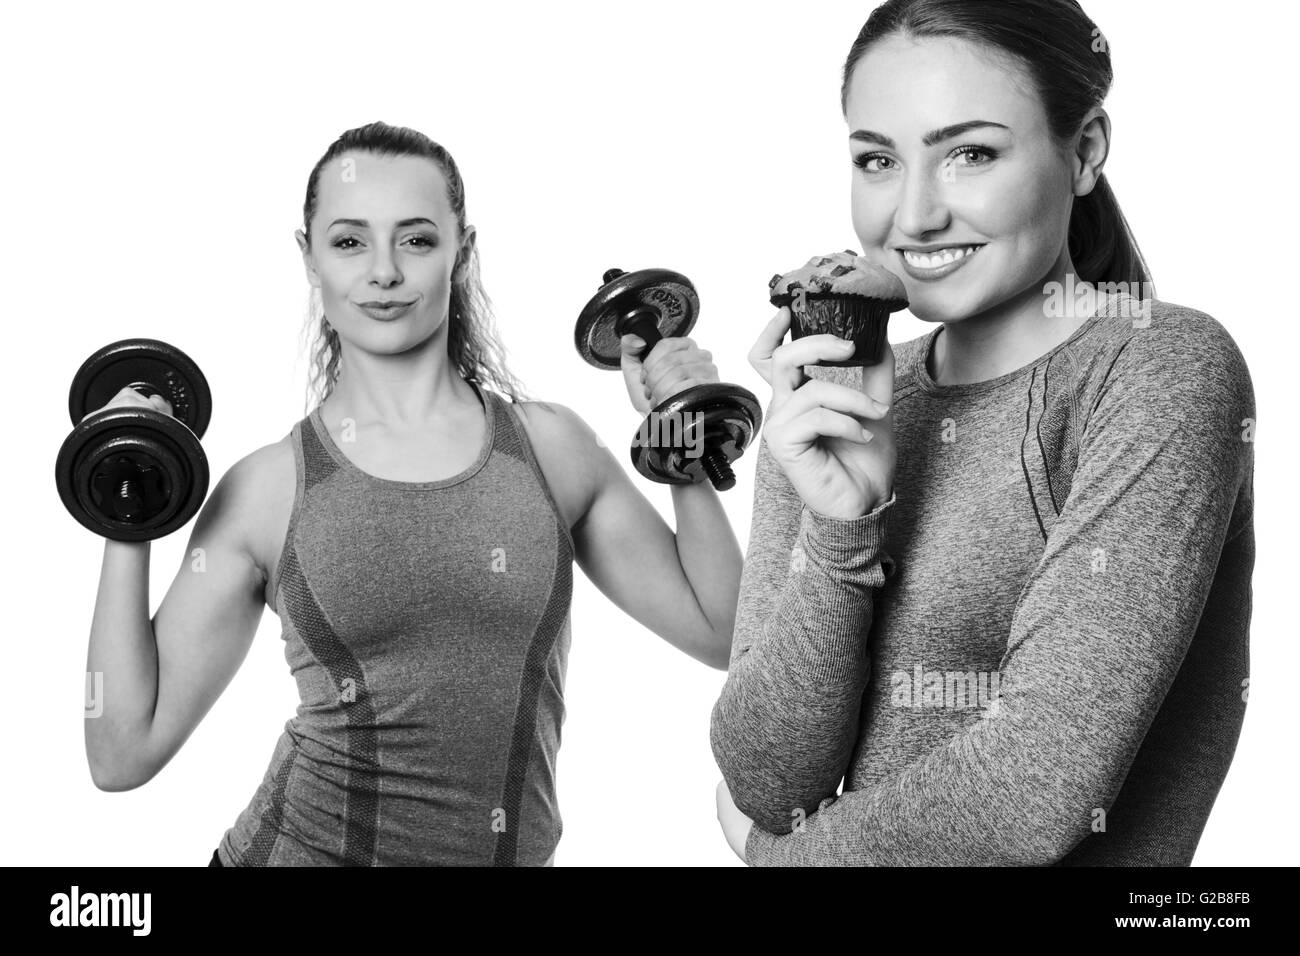 two fitness woman one holding a chocolate muffins the other working out using dumbbells Stock Photo